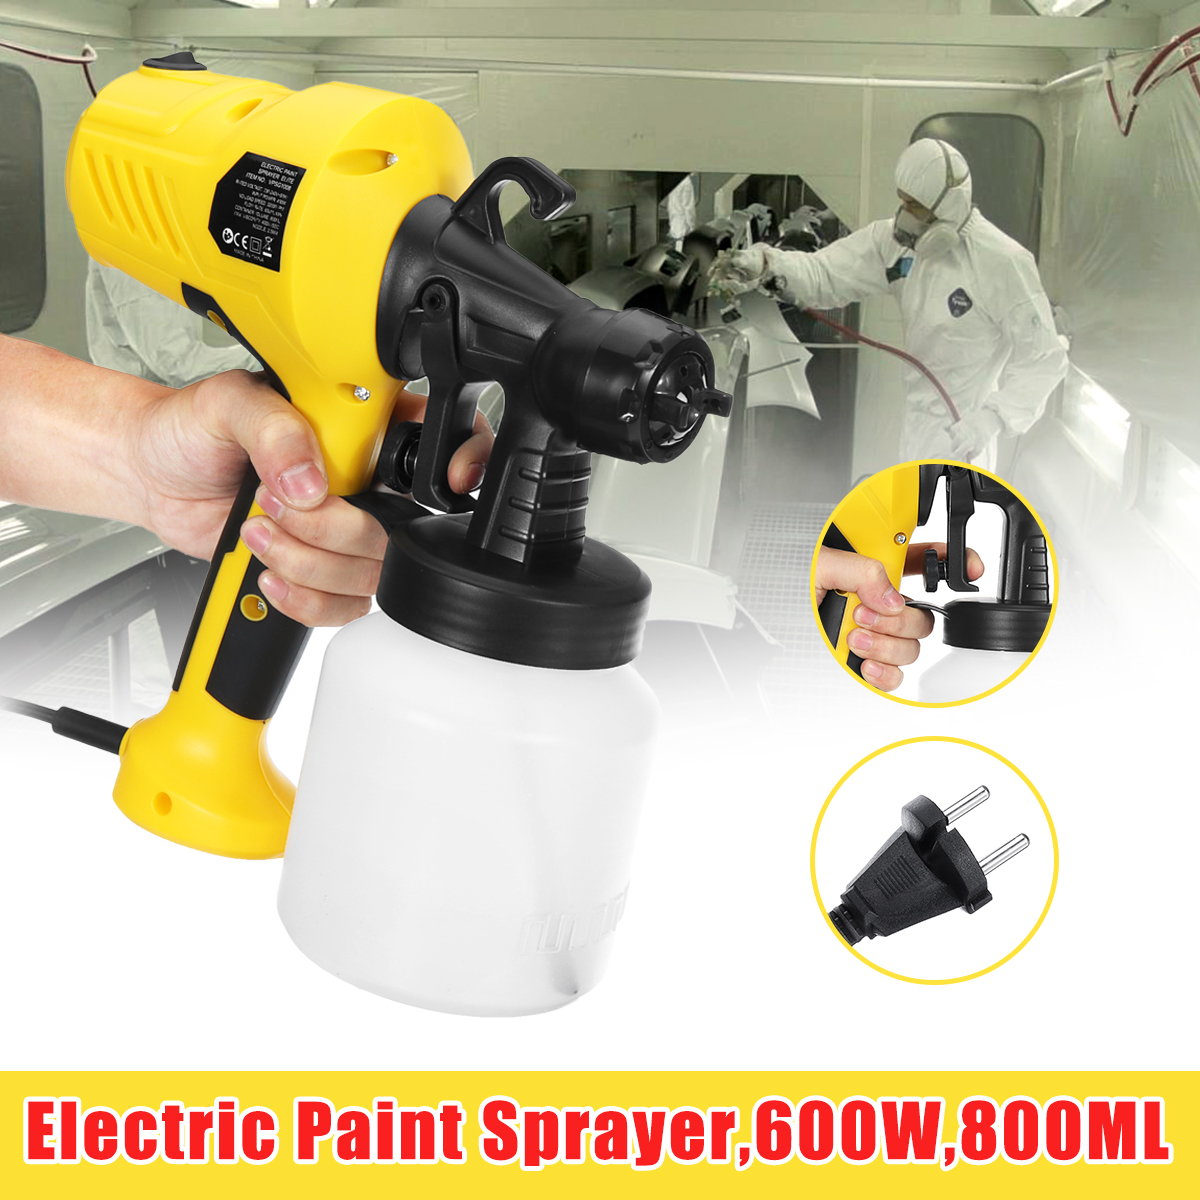 600W Electric Spray Paint Sprayer For Cars Wood Furniture Wall Woodworking 52